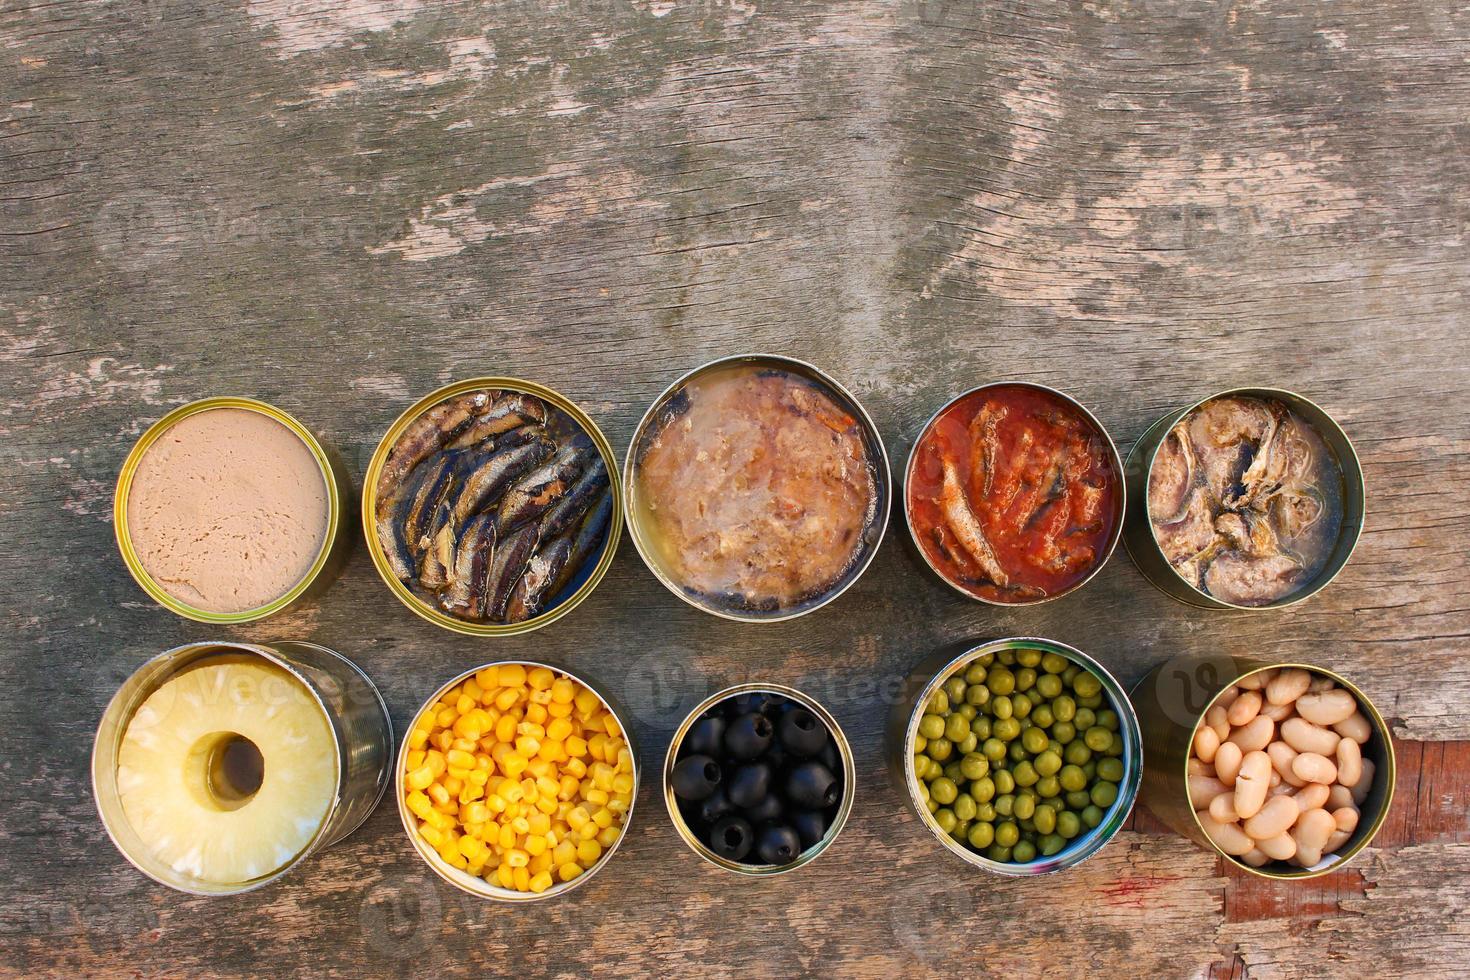 Different open canned food on old wooden background. Top view. Flat lay. photo